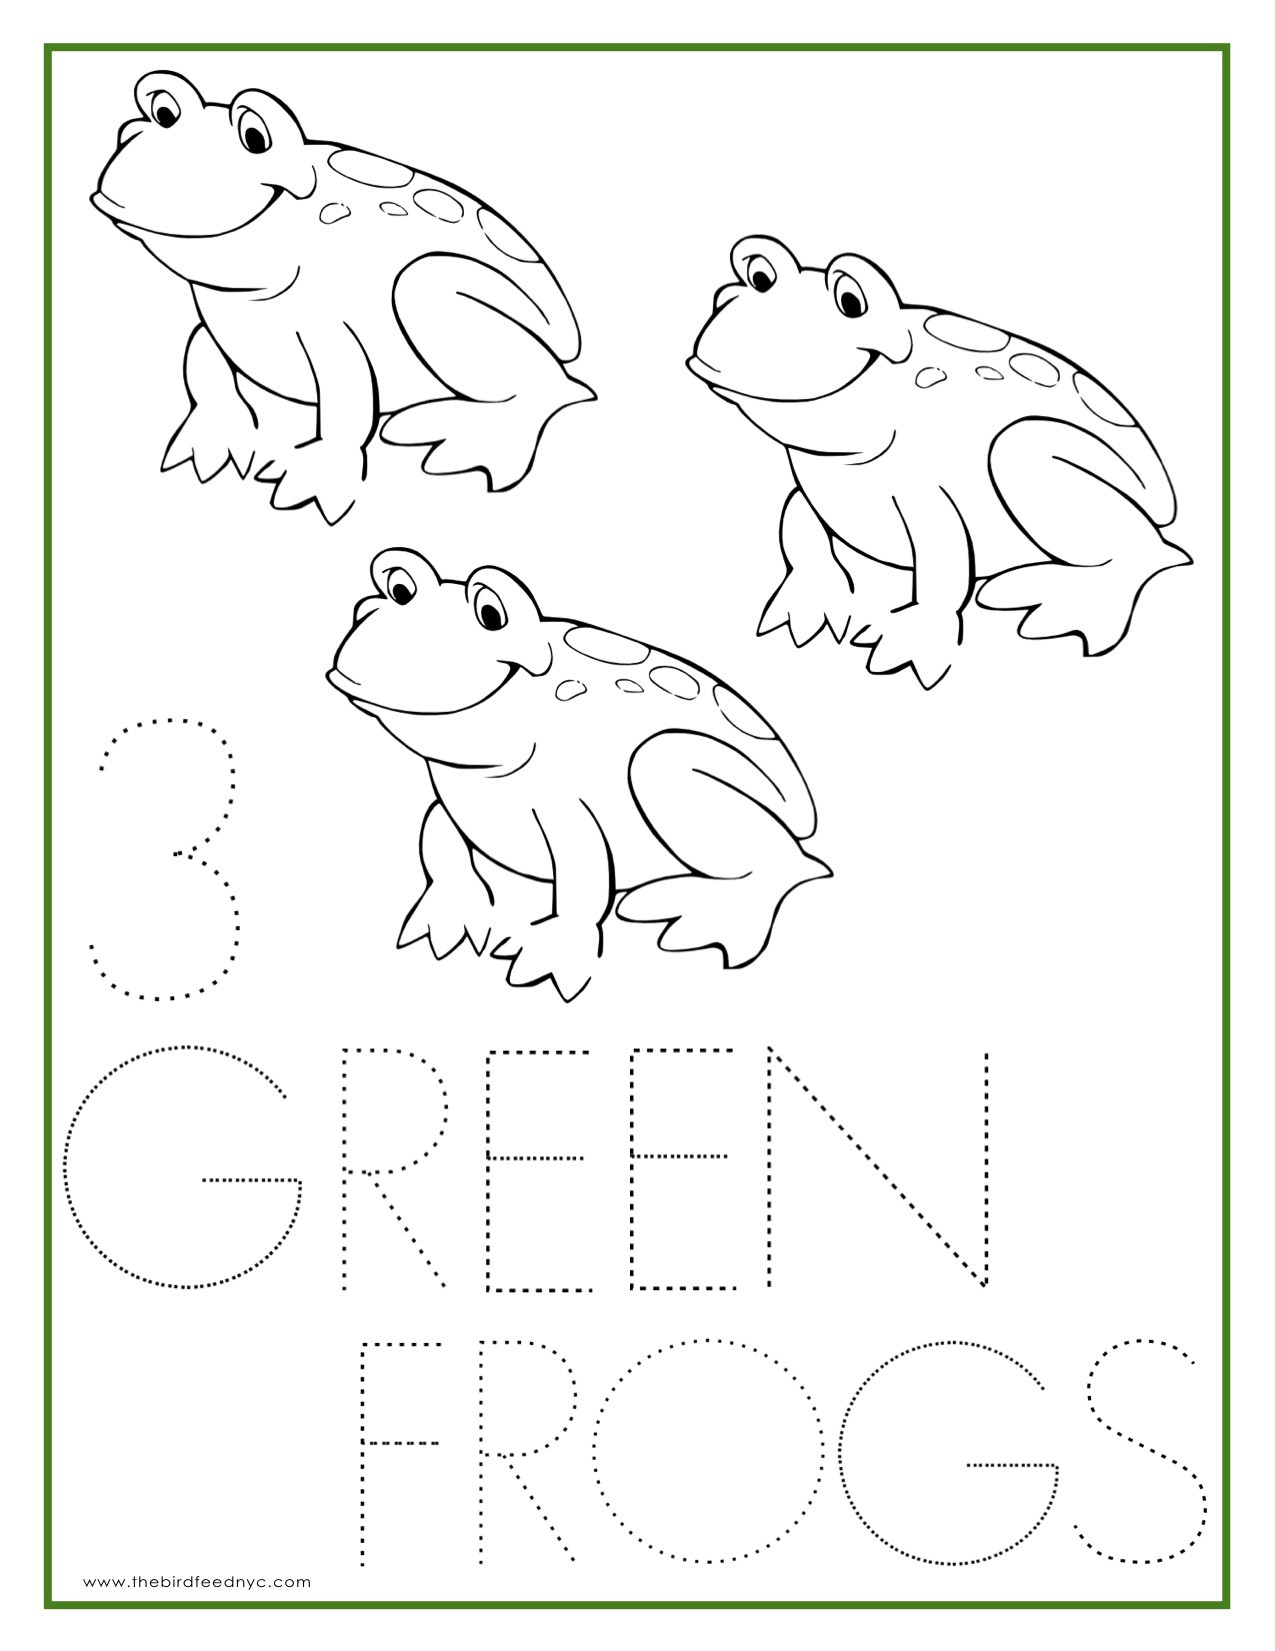 Number 3 Coloring Page at GetColorings.com | Free printable colorings